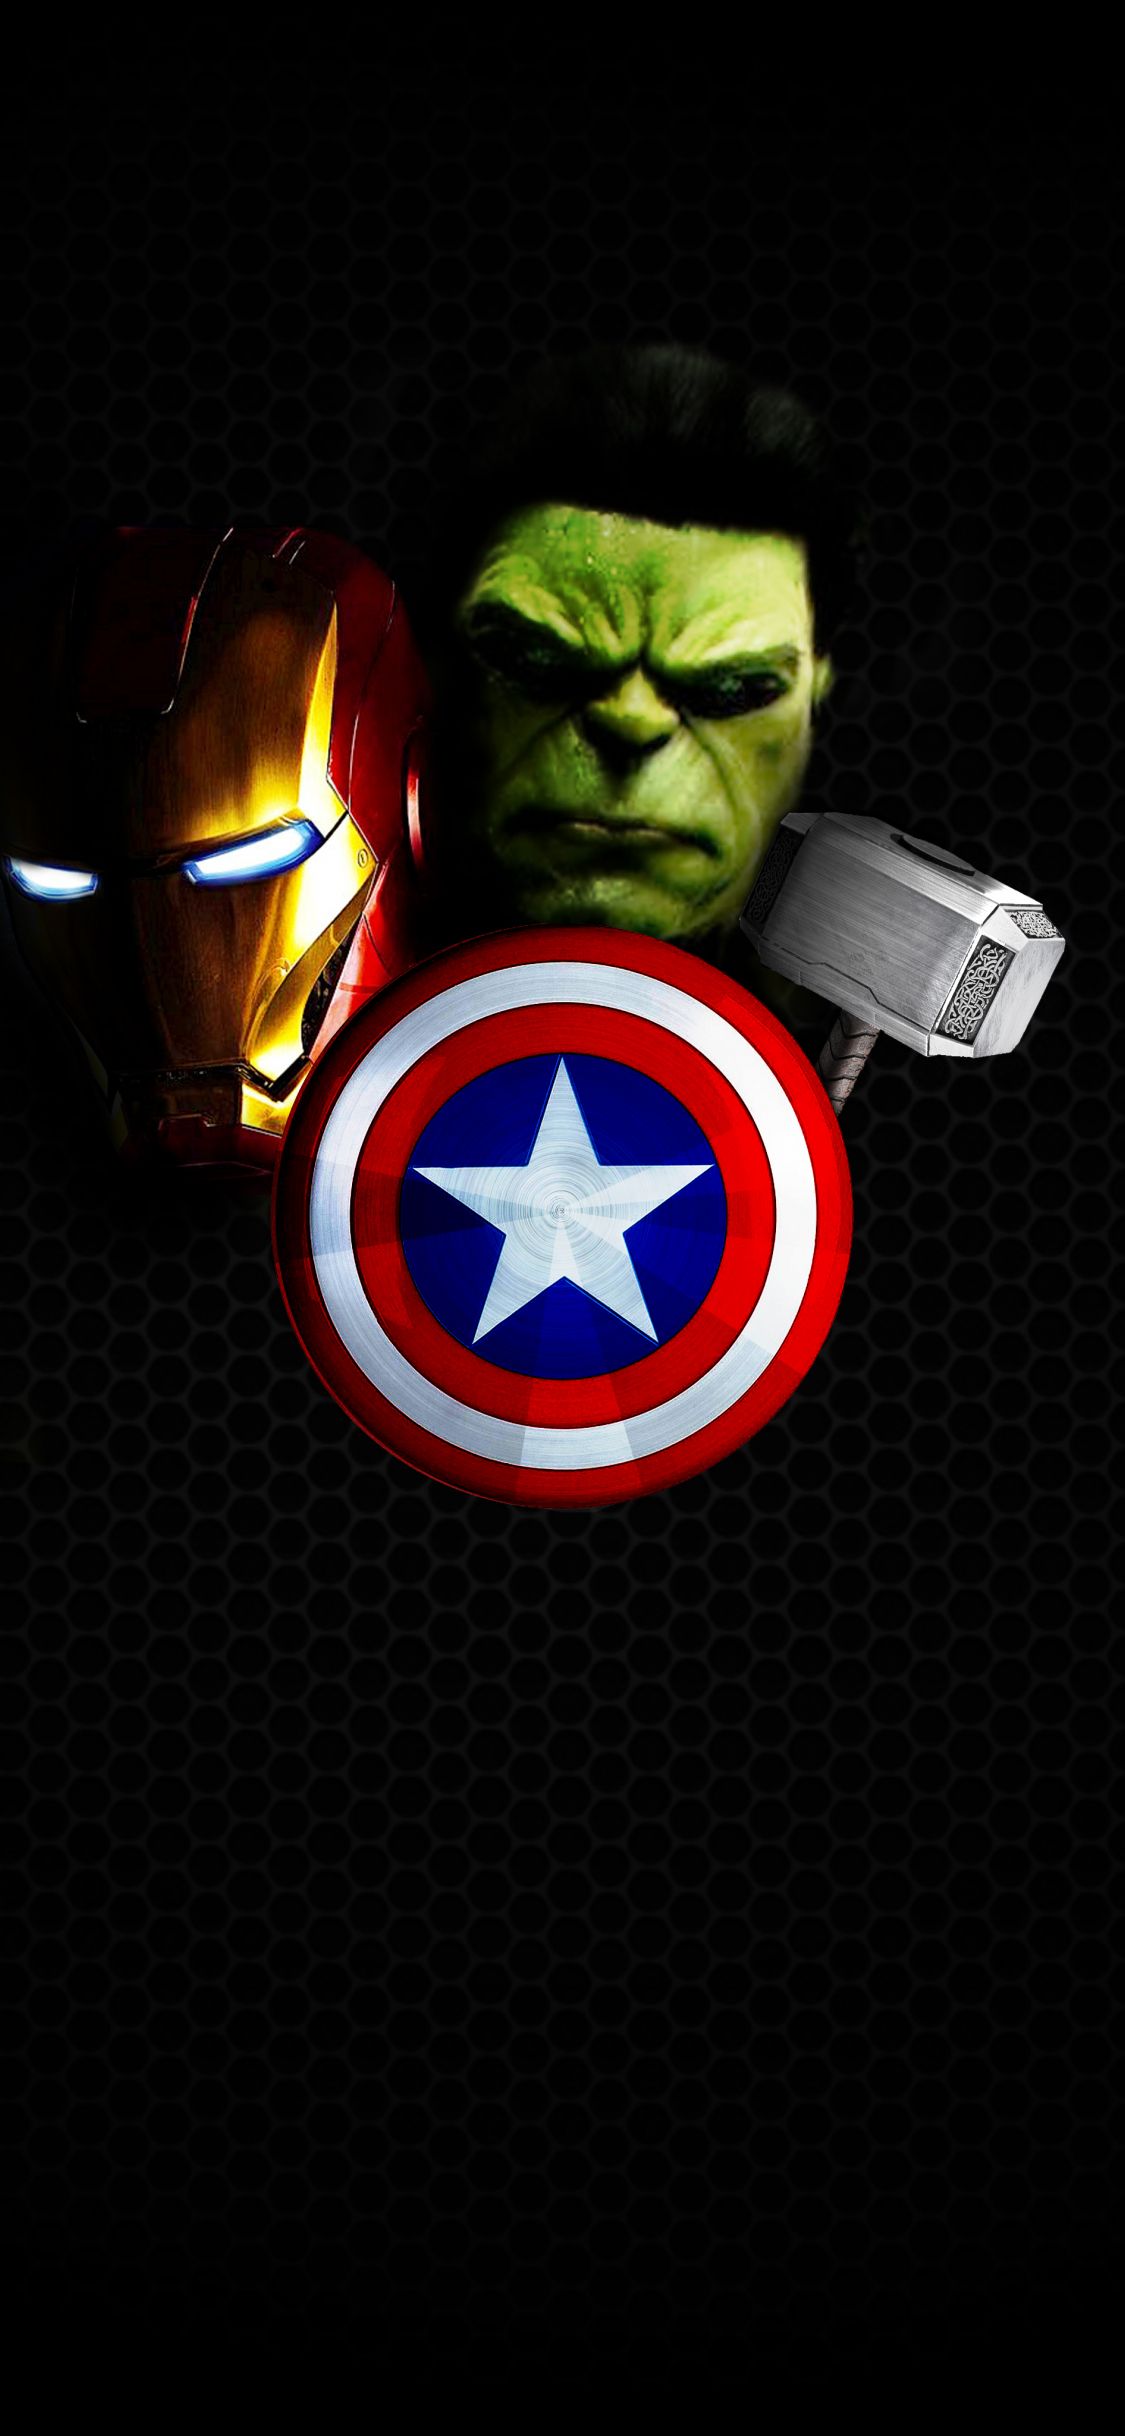 Free download Avengers HD ipadiphoneandroid Wallpaper by ShikharSrivastava on [3072x4096] for your Desktop, Mobile & Tablet. Explore Avengers iPhone Wallpaper. Thor iPhone Wallpaper, Marvel iPhone Wallpaper, Iron Man Wallpaper iPhone